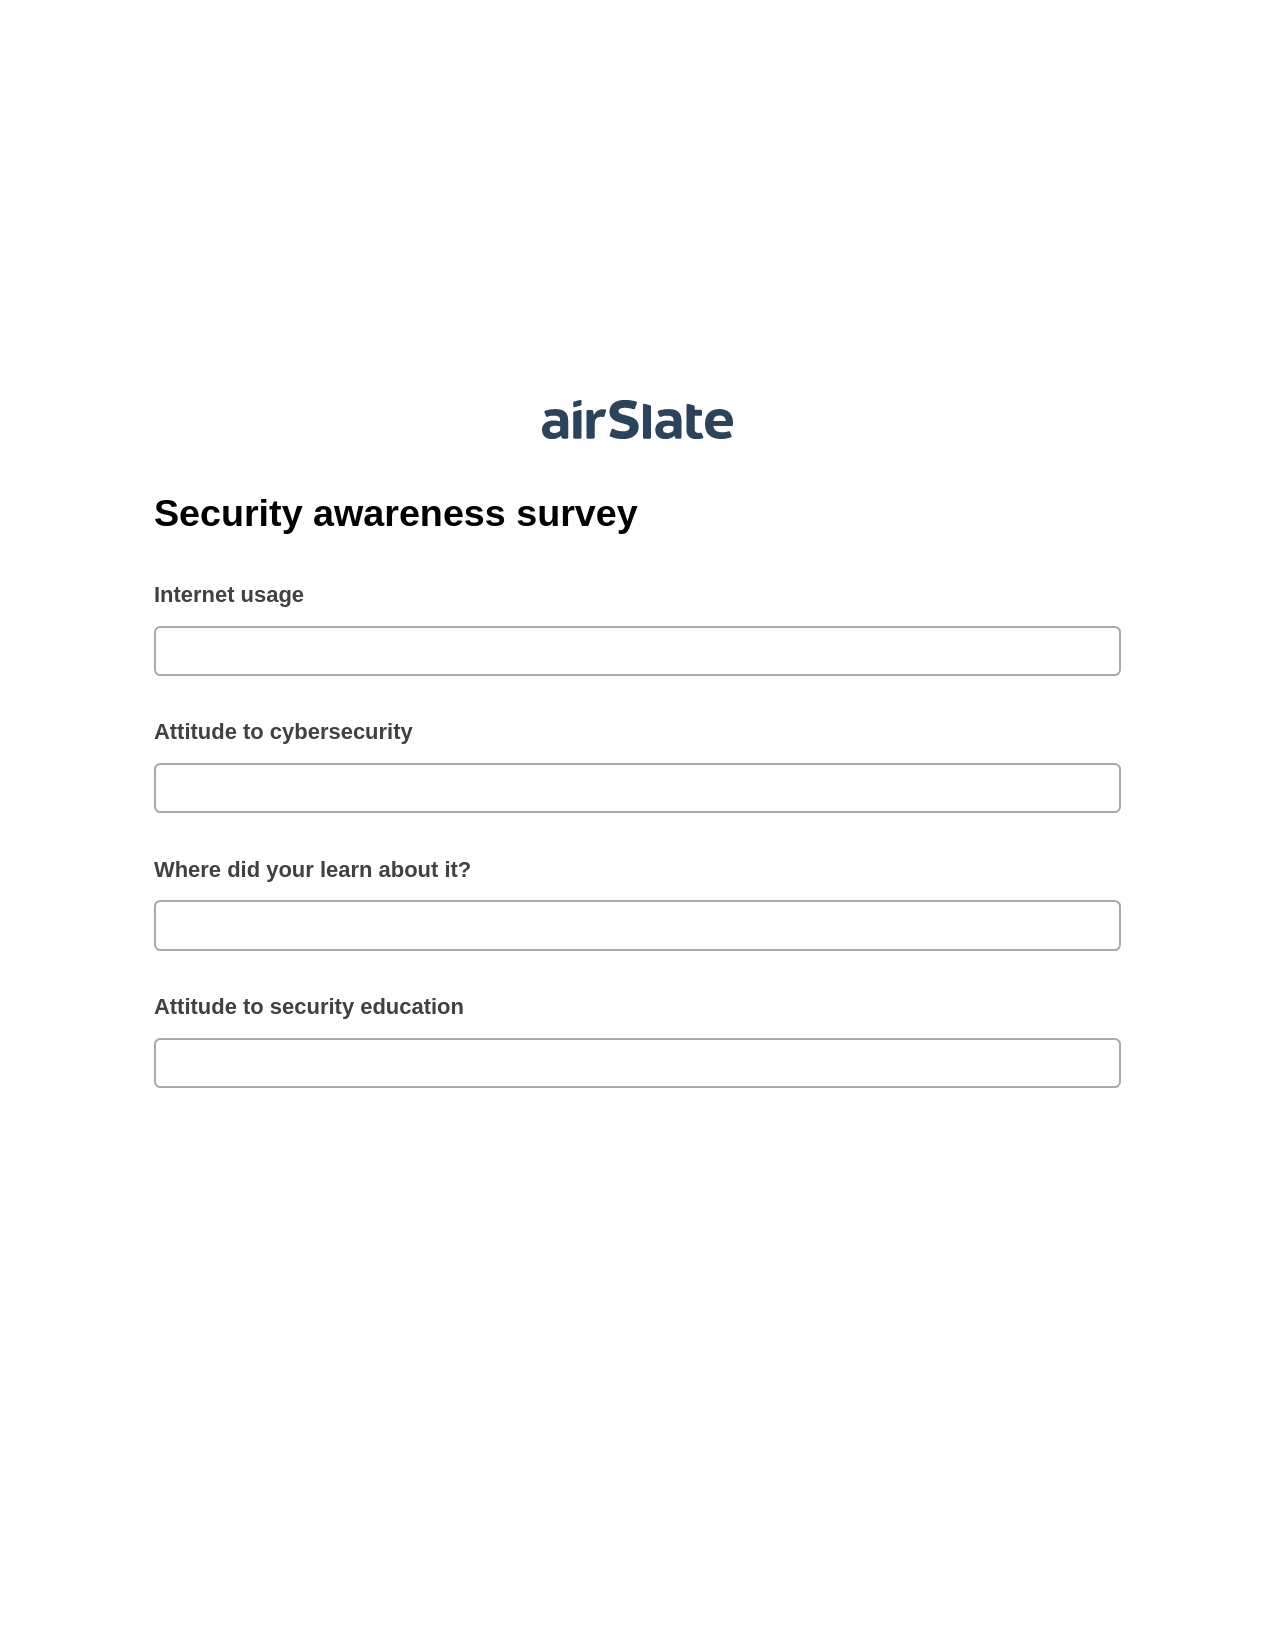 Security awareness survey Pre-fill from Salesforce Record Bot, Open as Role Bot, Export to Smartsheet